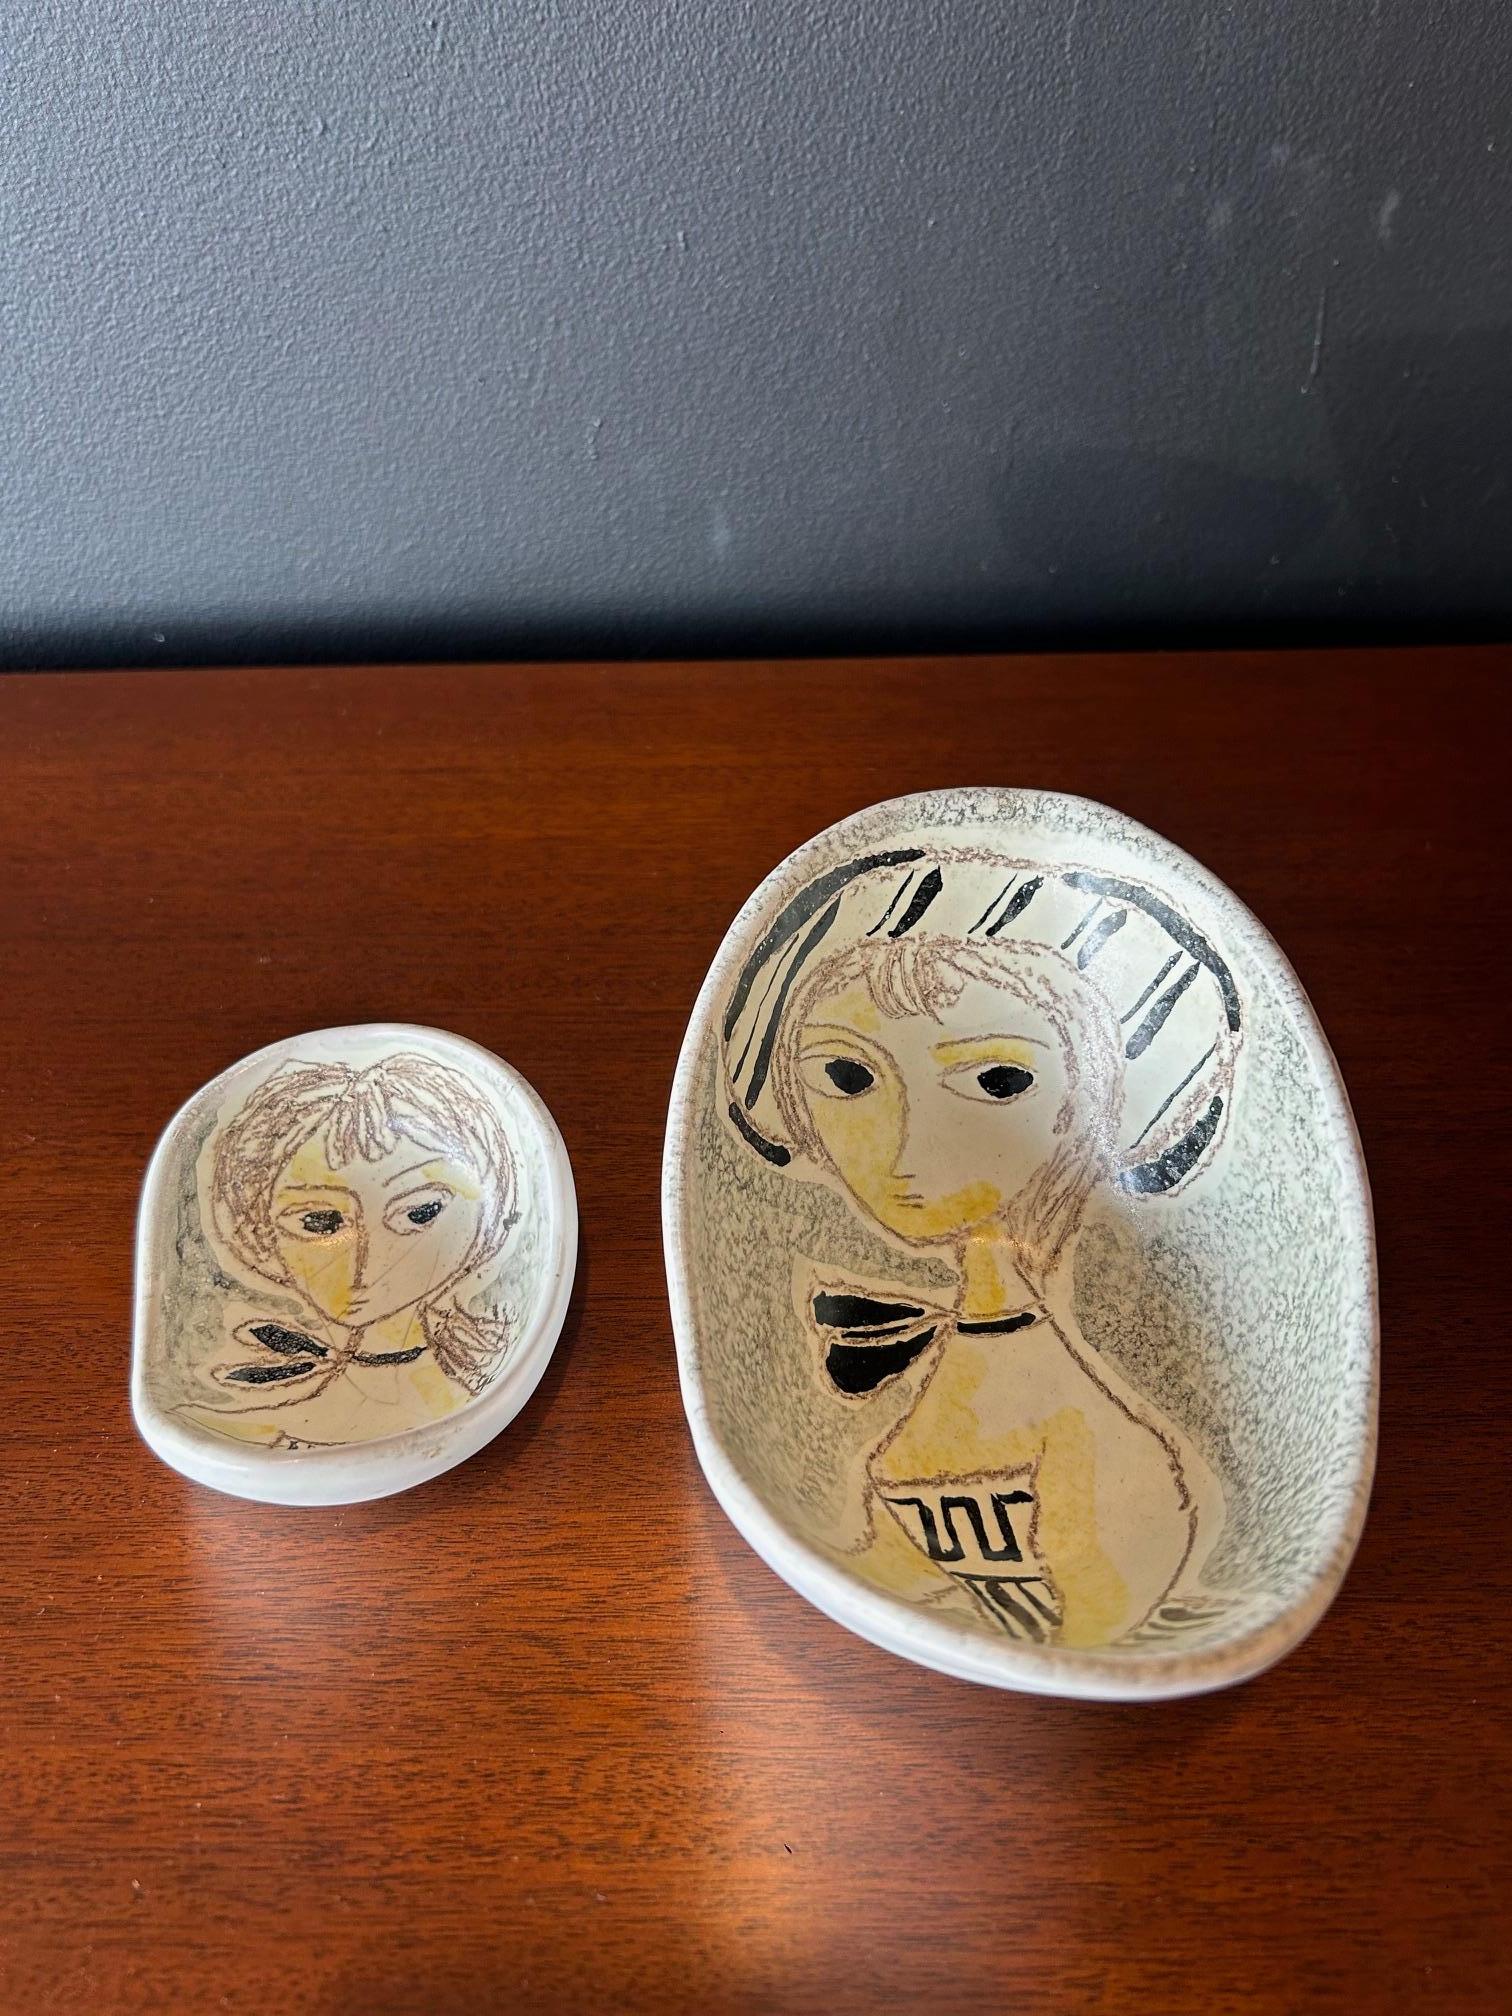 Pair of Italian curvy small ceramic dishes featuring stylized women's portraits by Marcello Fantoni for Raymor. Dimensions for the larger dish: 3.25 H x 6.5 W x 4.5 D inches, and the smaller dish: 2 H x 3.5 W x 3 D inches. Price listed is for both